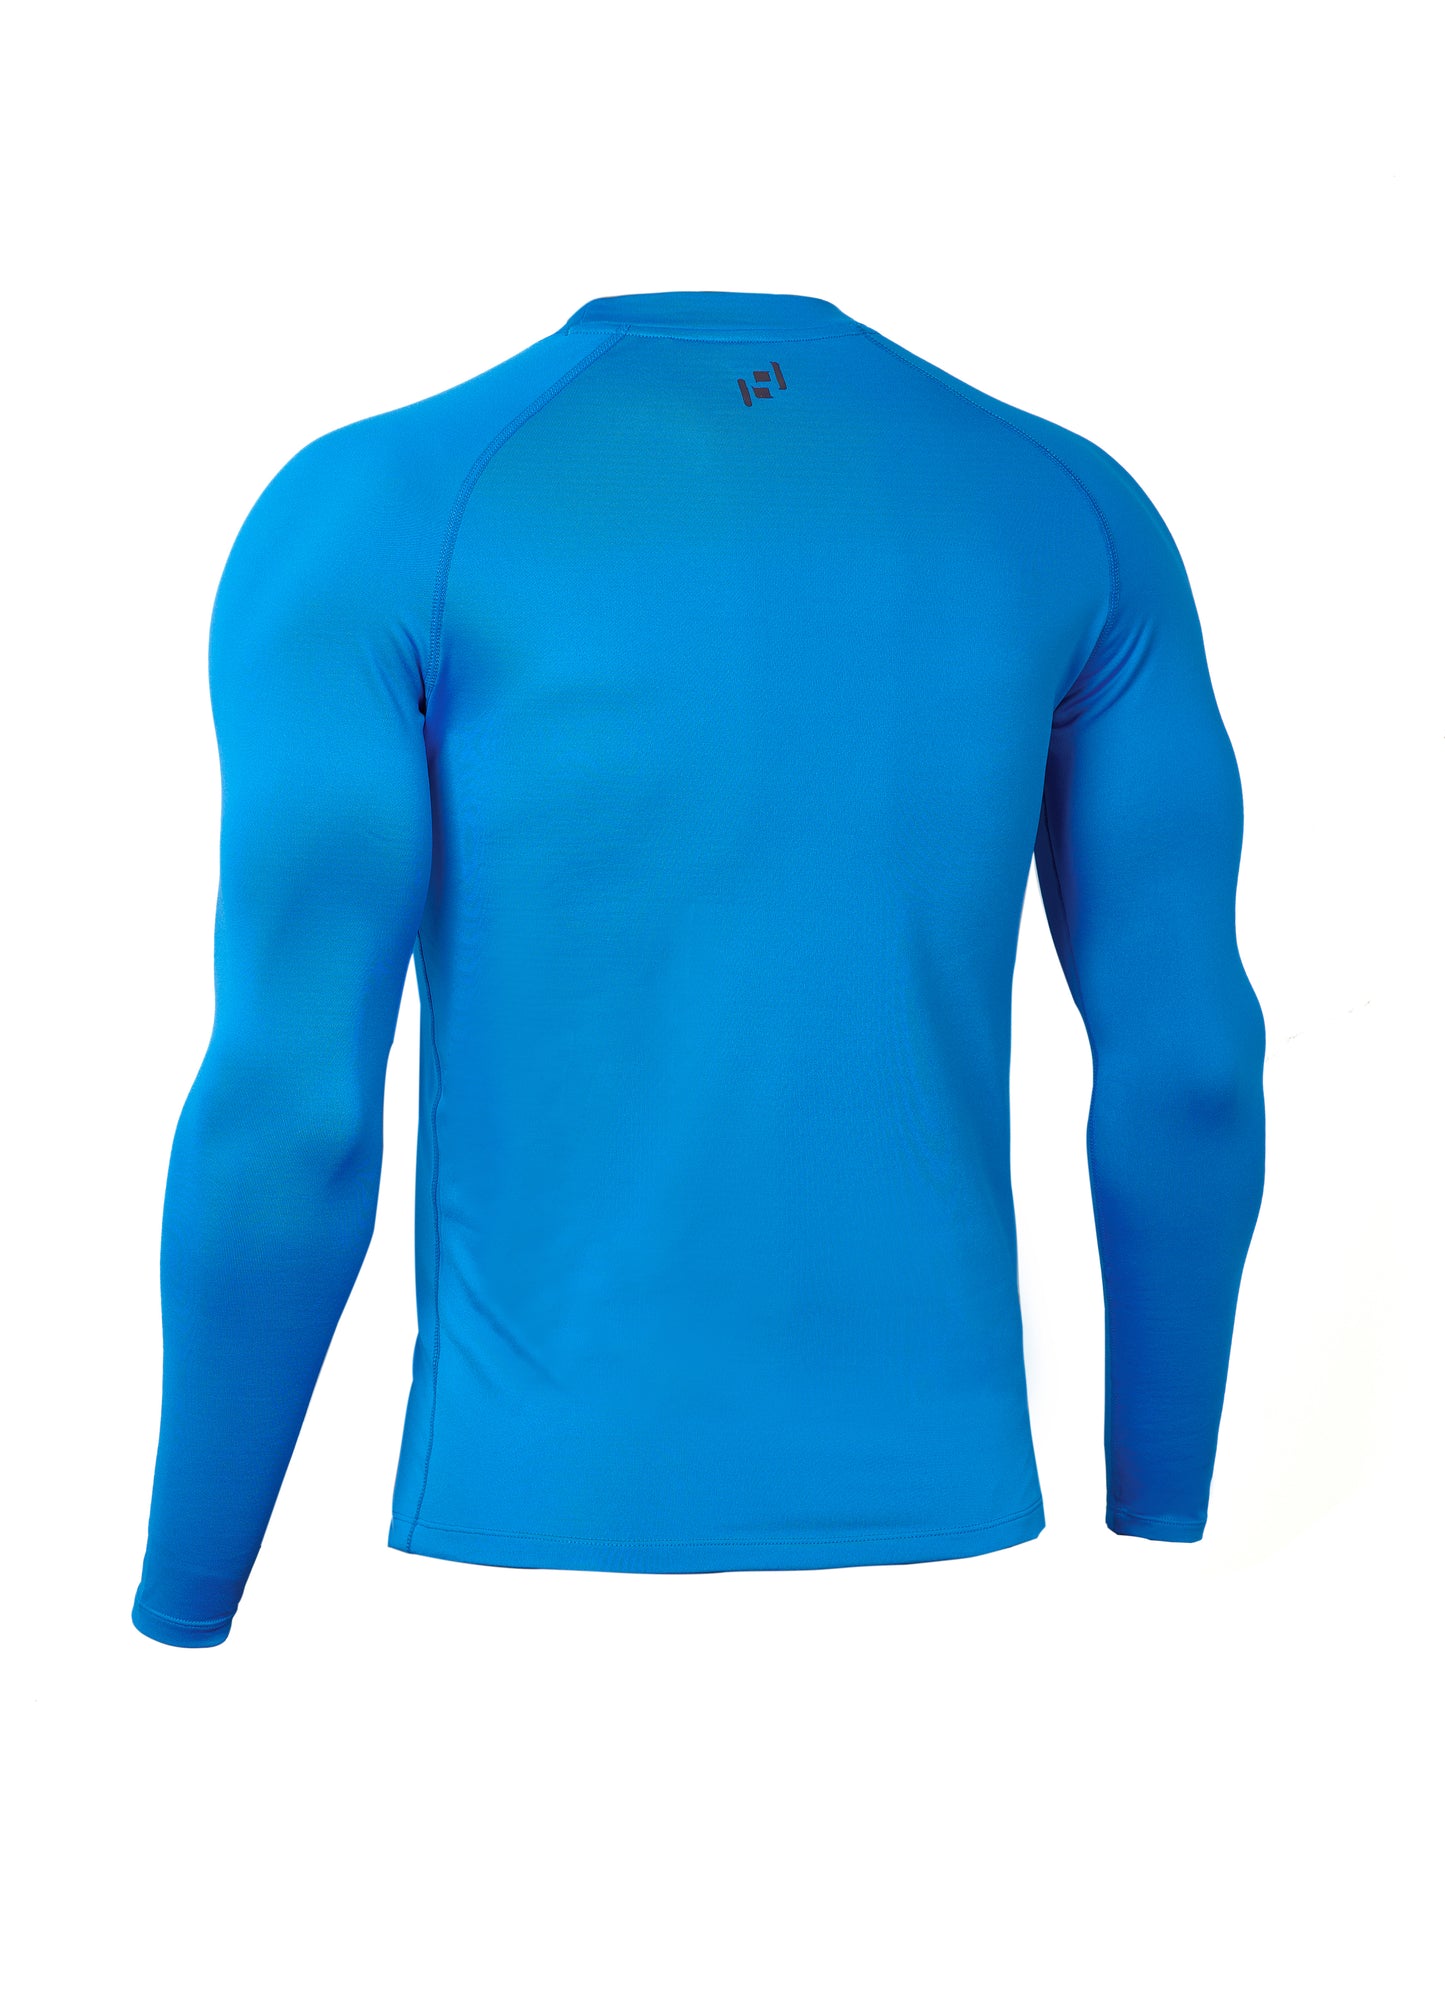 Essential Thermal Base Layer Shirt Blue